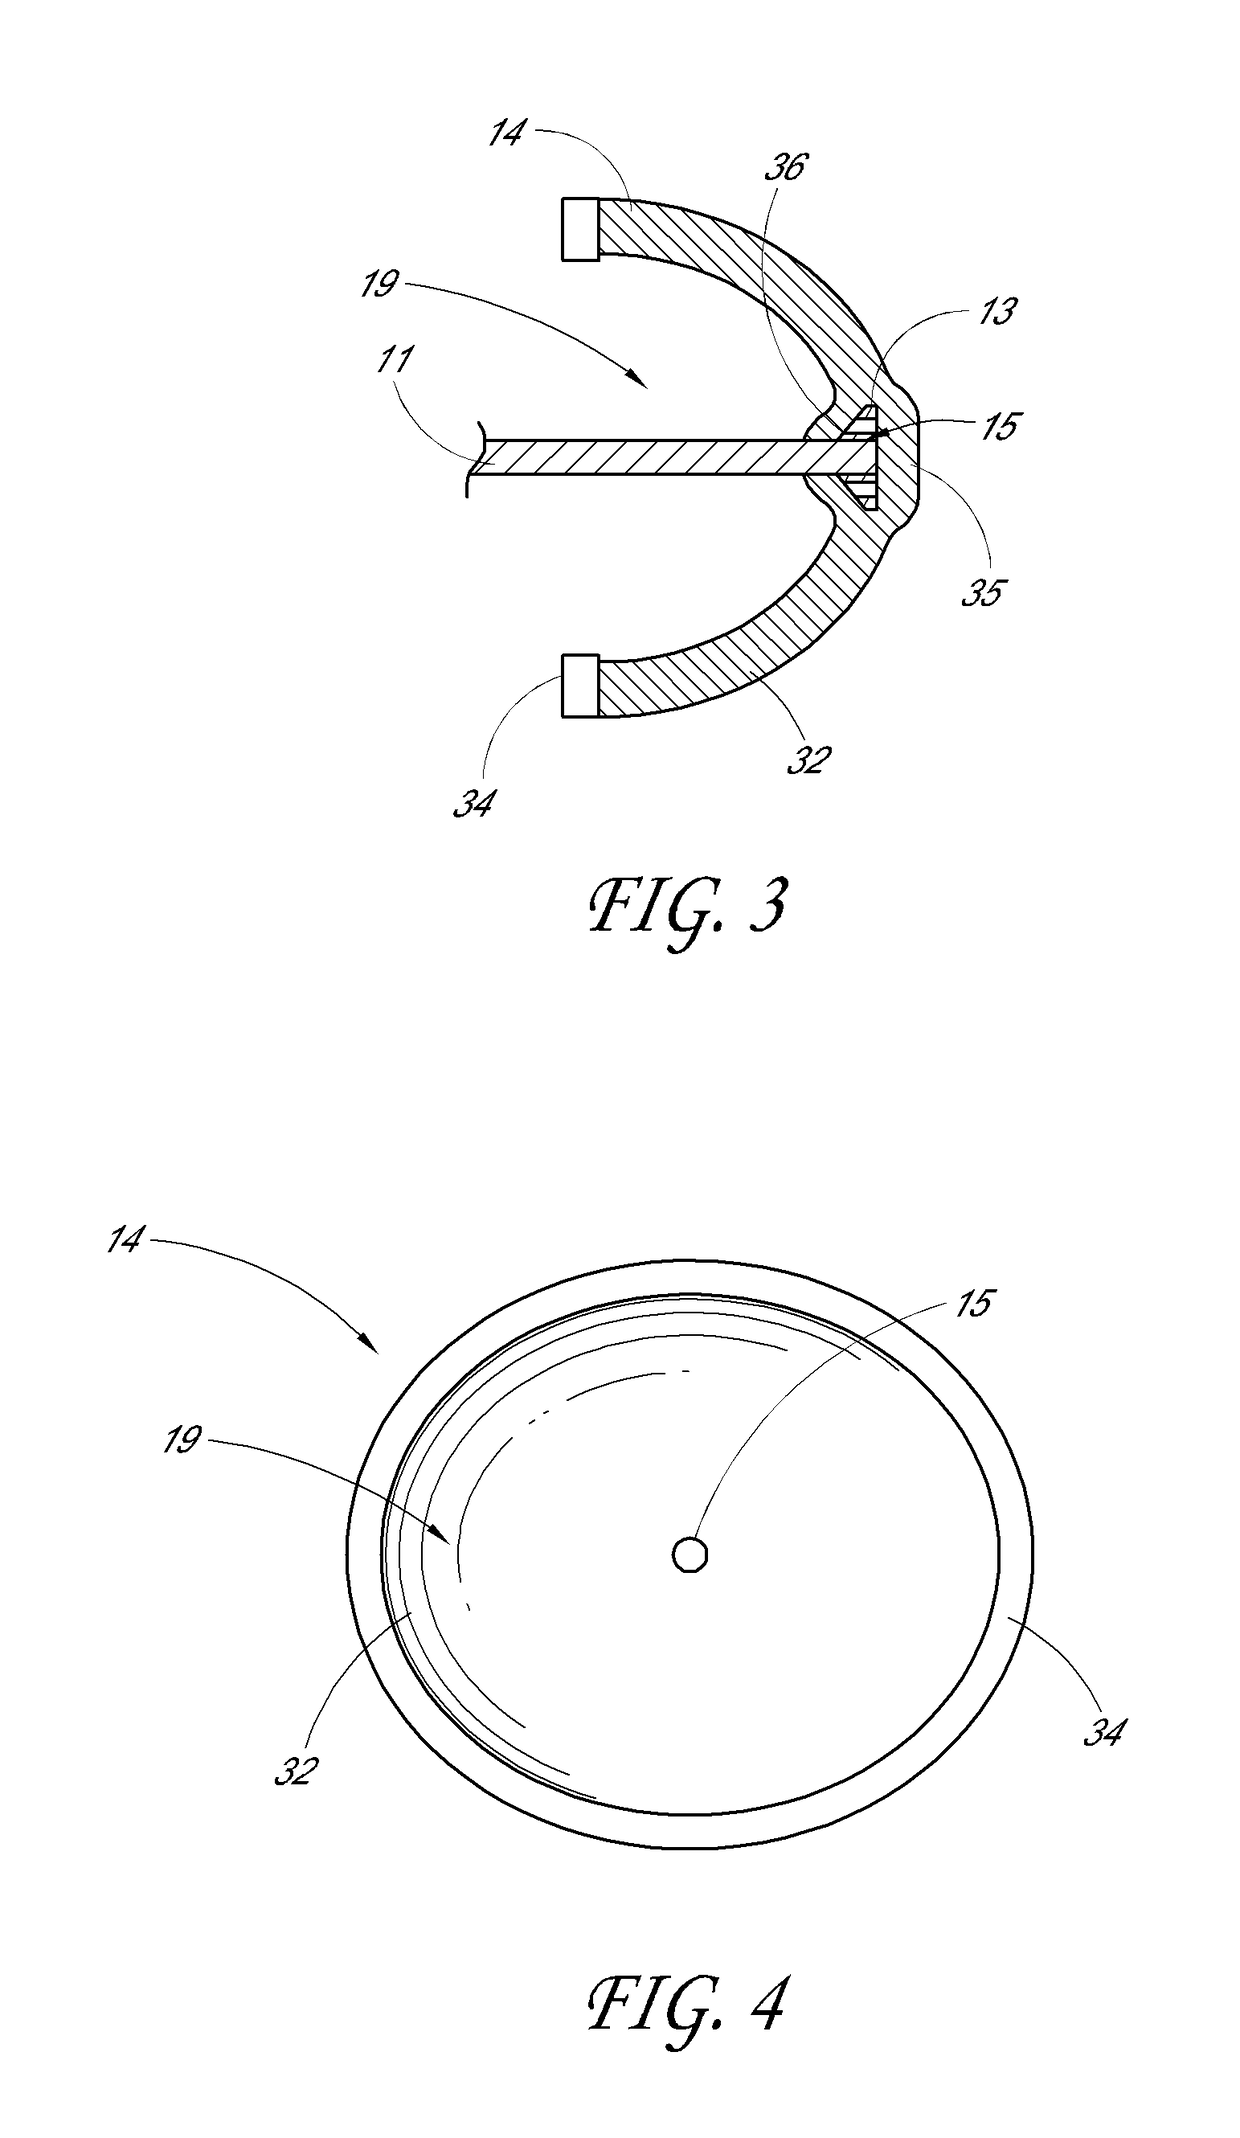 Device and method for assisting end-to-side anastomosis